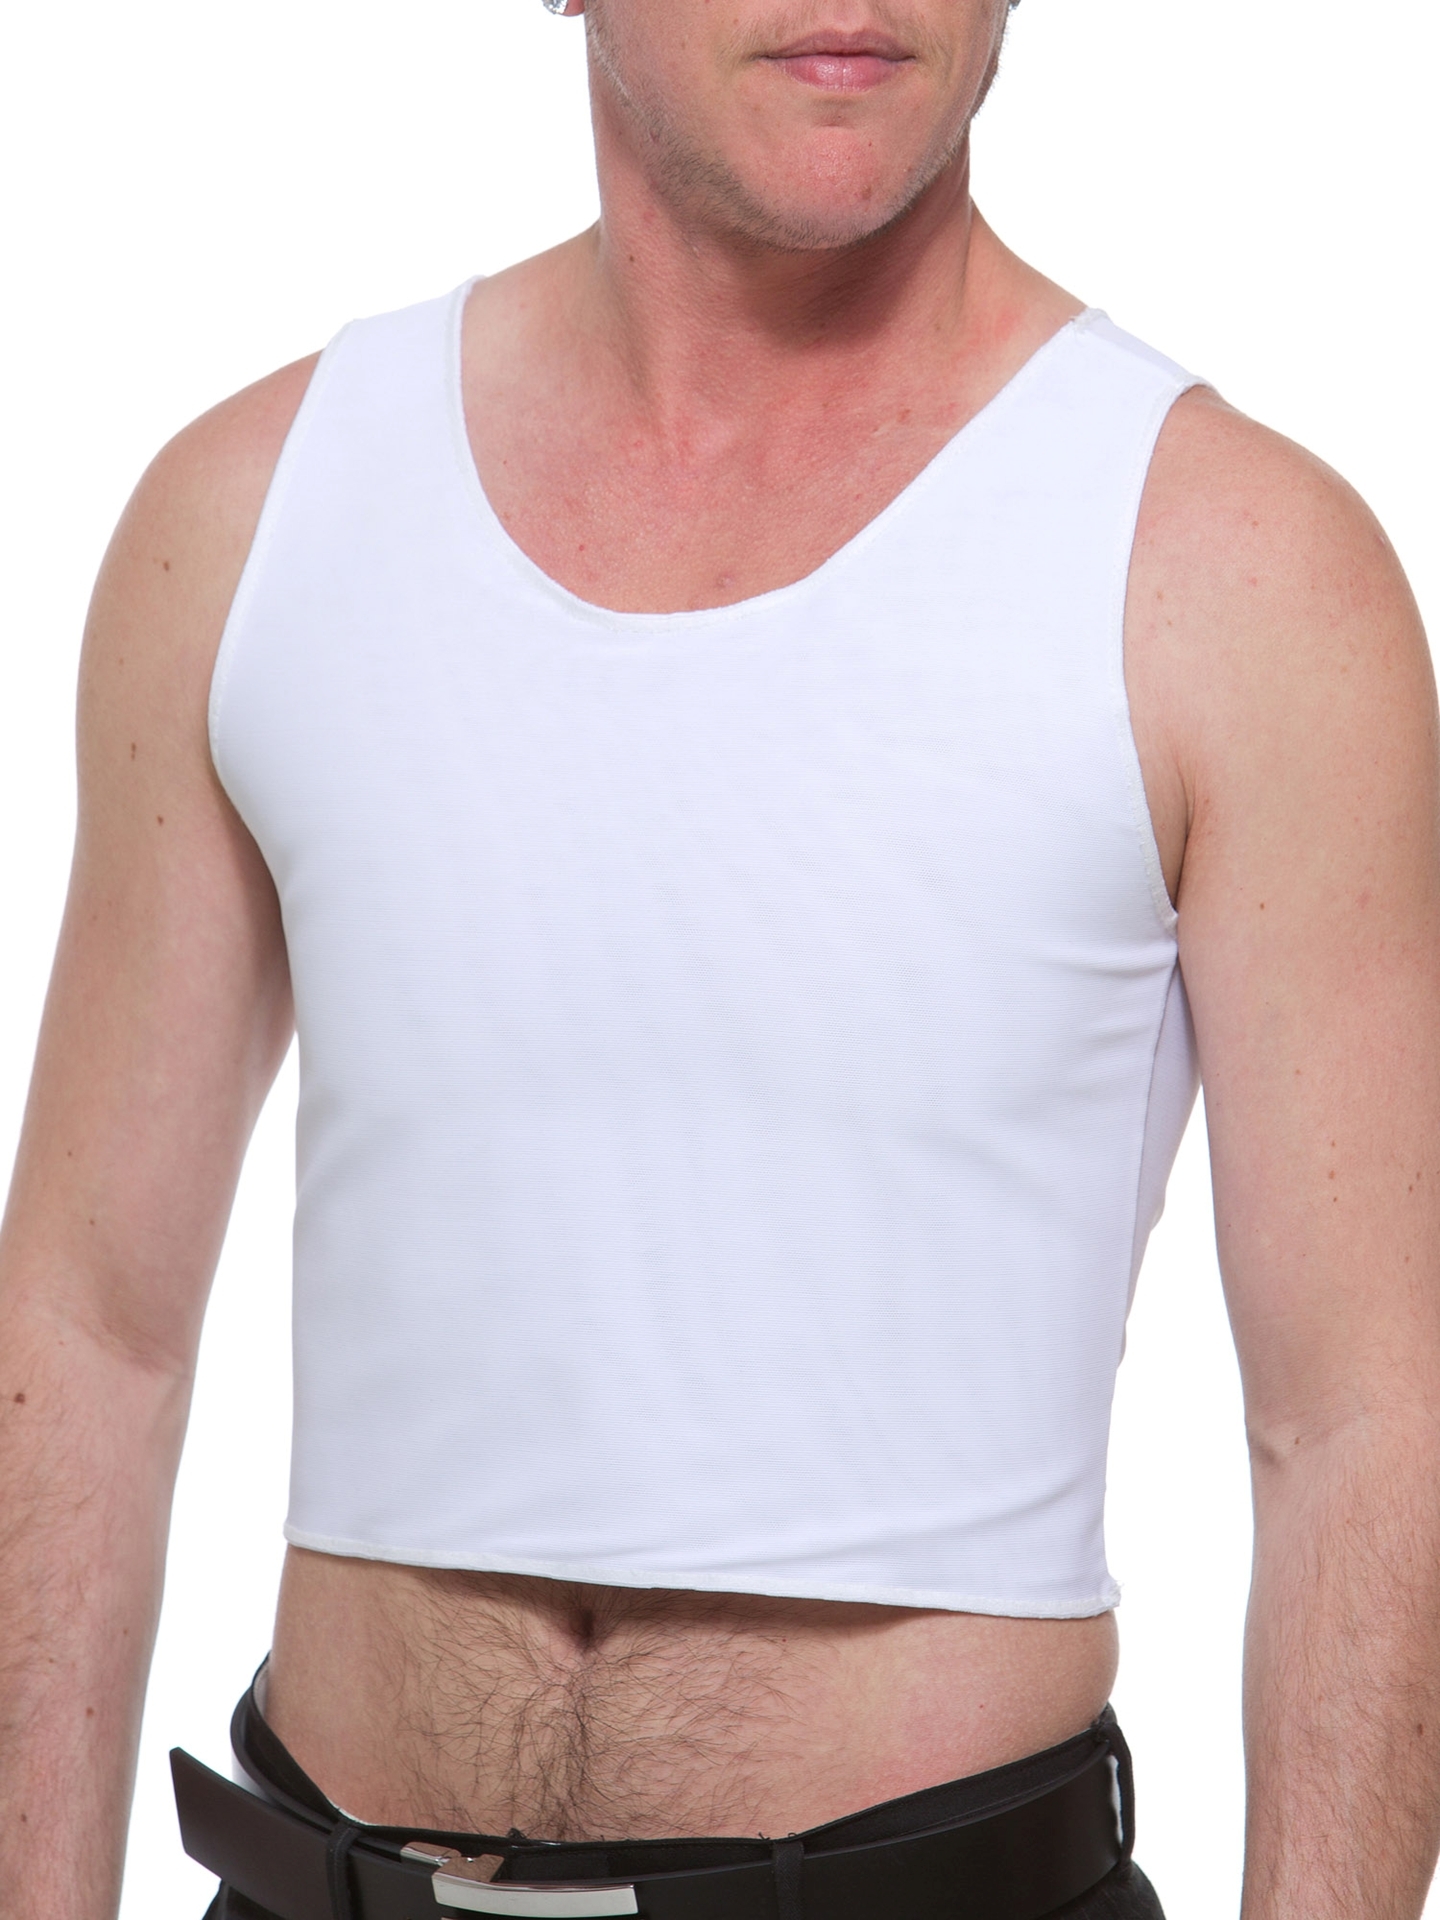 The Cotton Lined Power Chest Binder Top. FTM Chest Binders for Trans